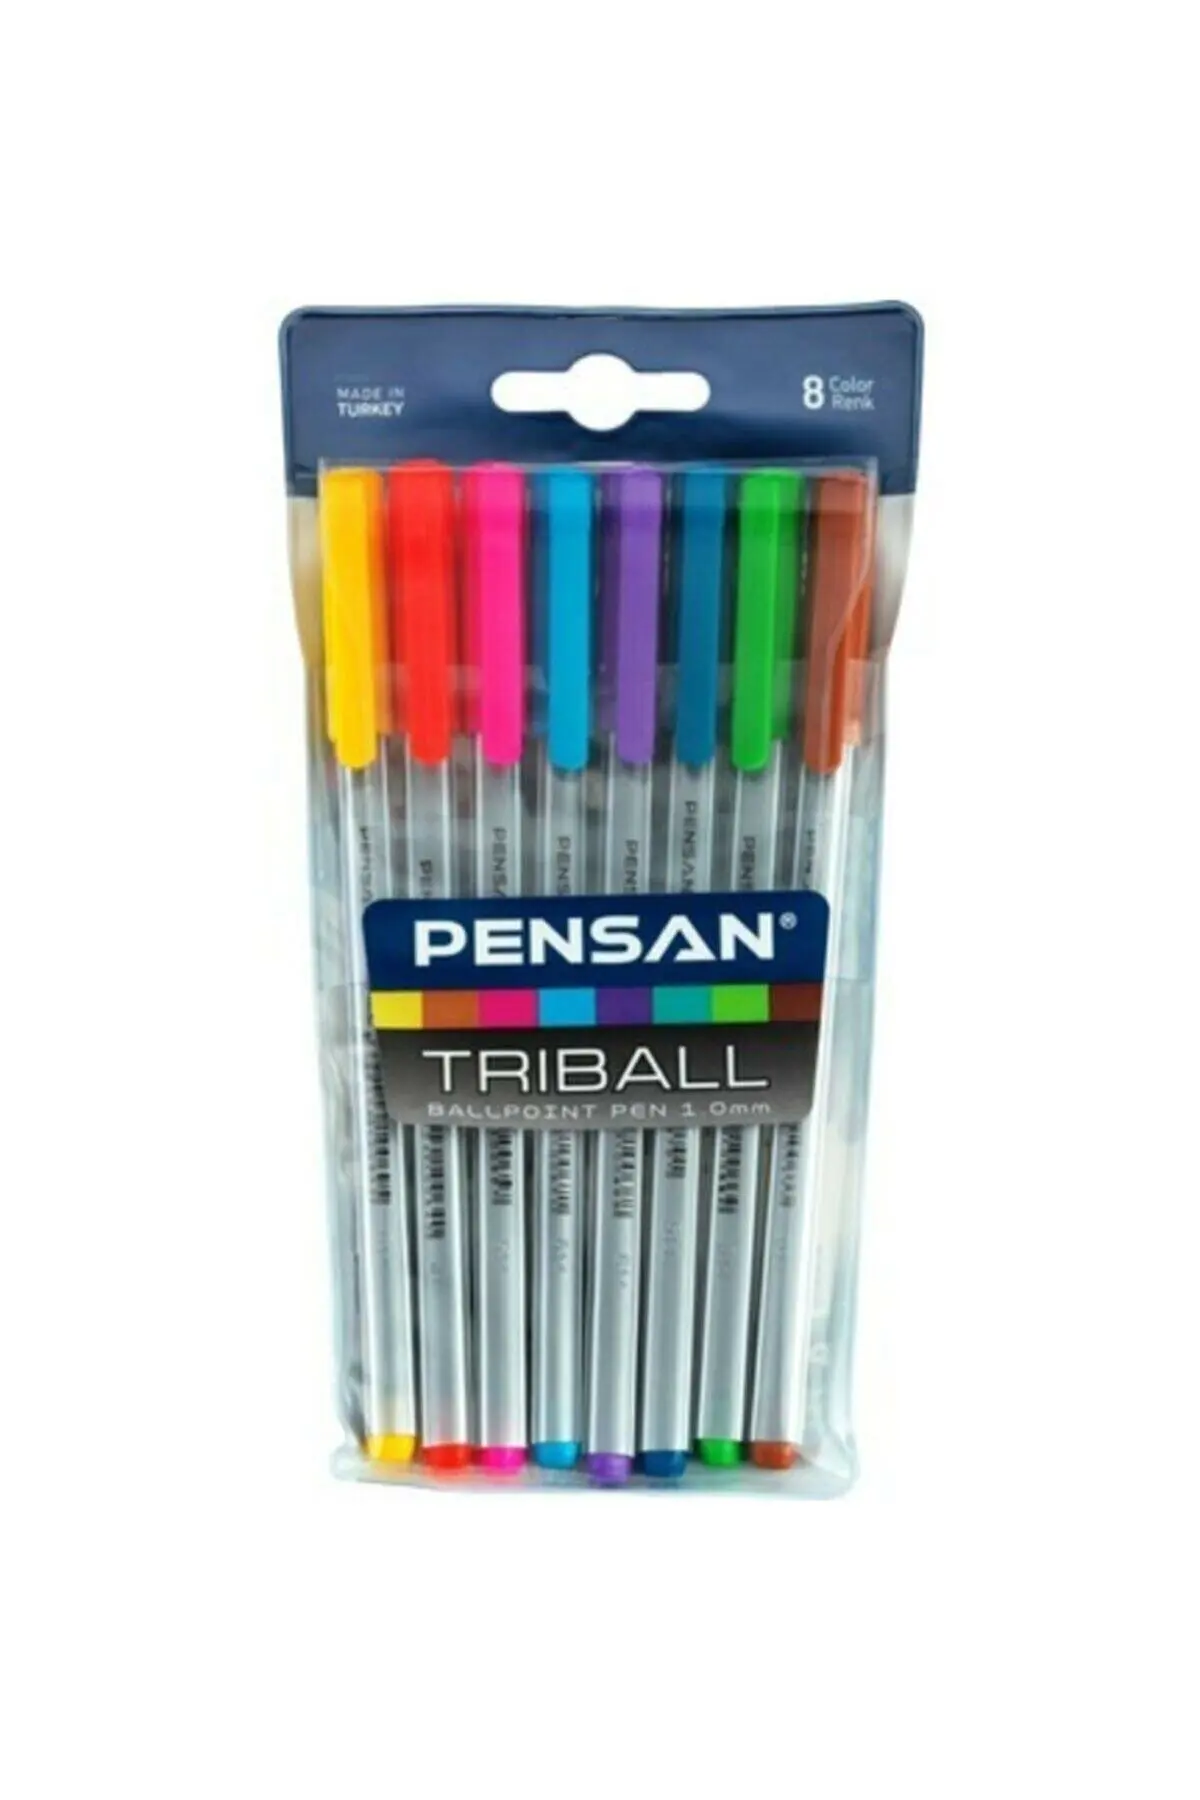 

Krc Stationery Pensan Triball 8 Color Ballpoint Pen Set Triangular Body High Quality Ink Suitable For Home School And Office Use